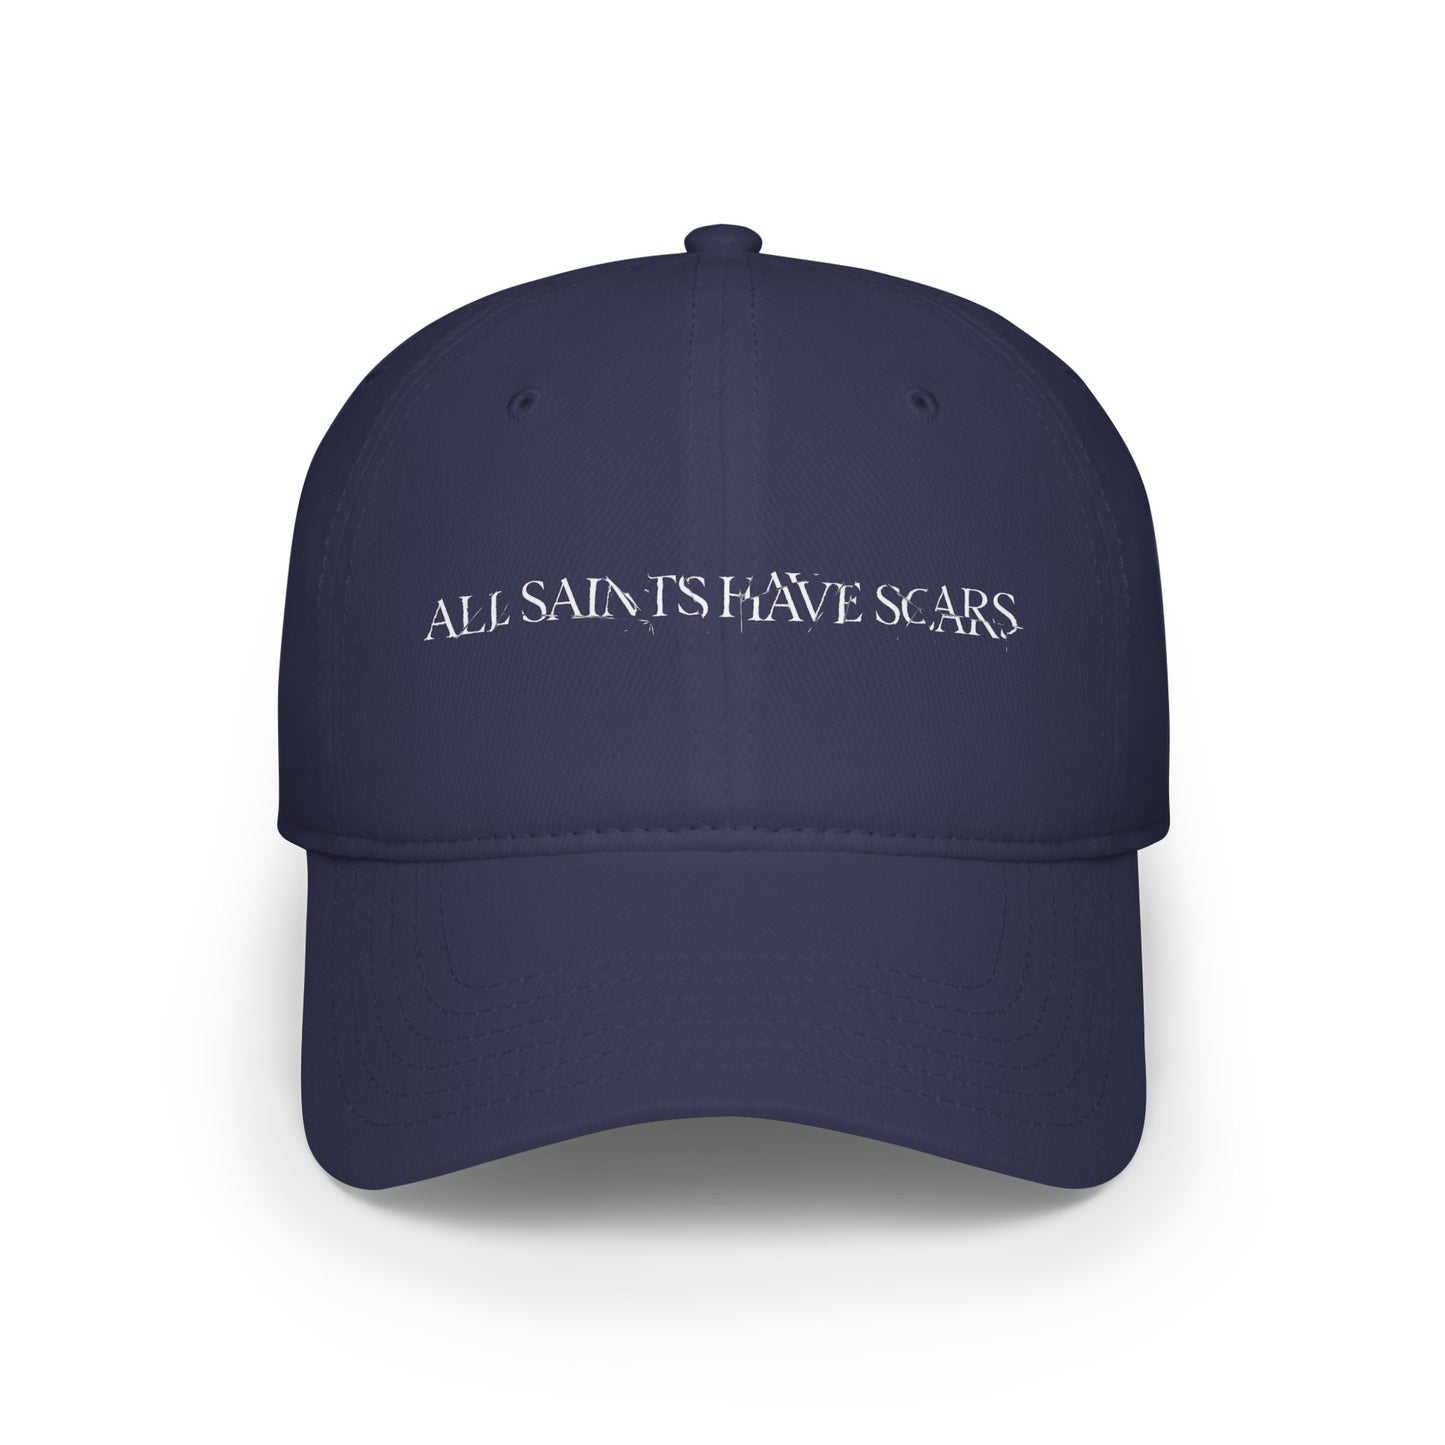 S&S ASHS Cracked Text Hat